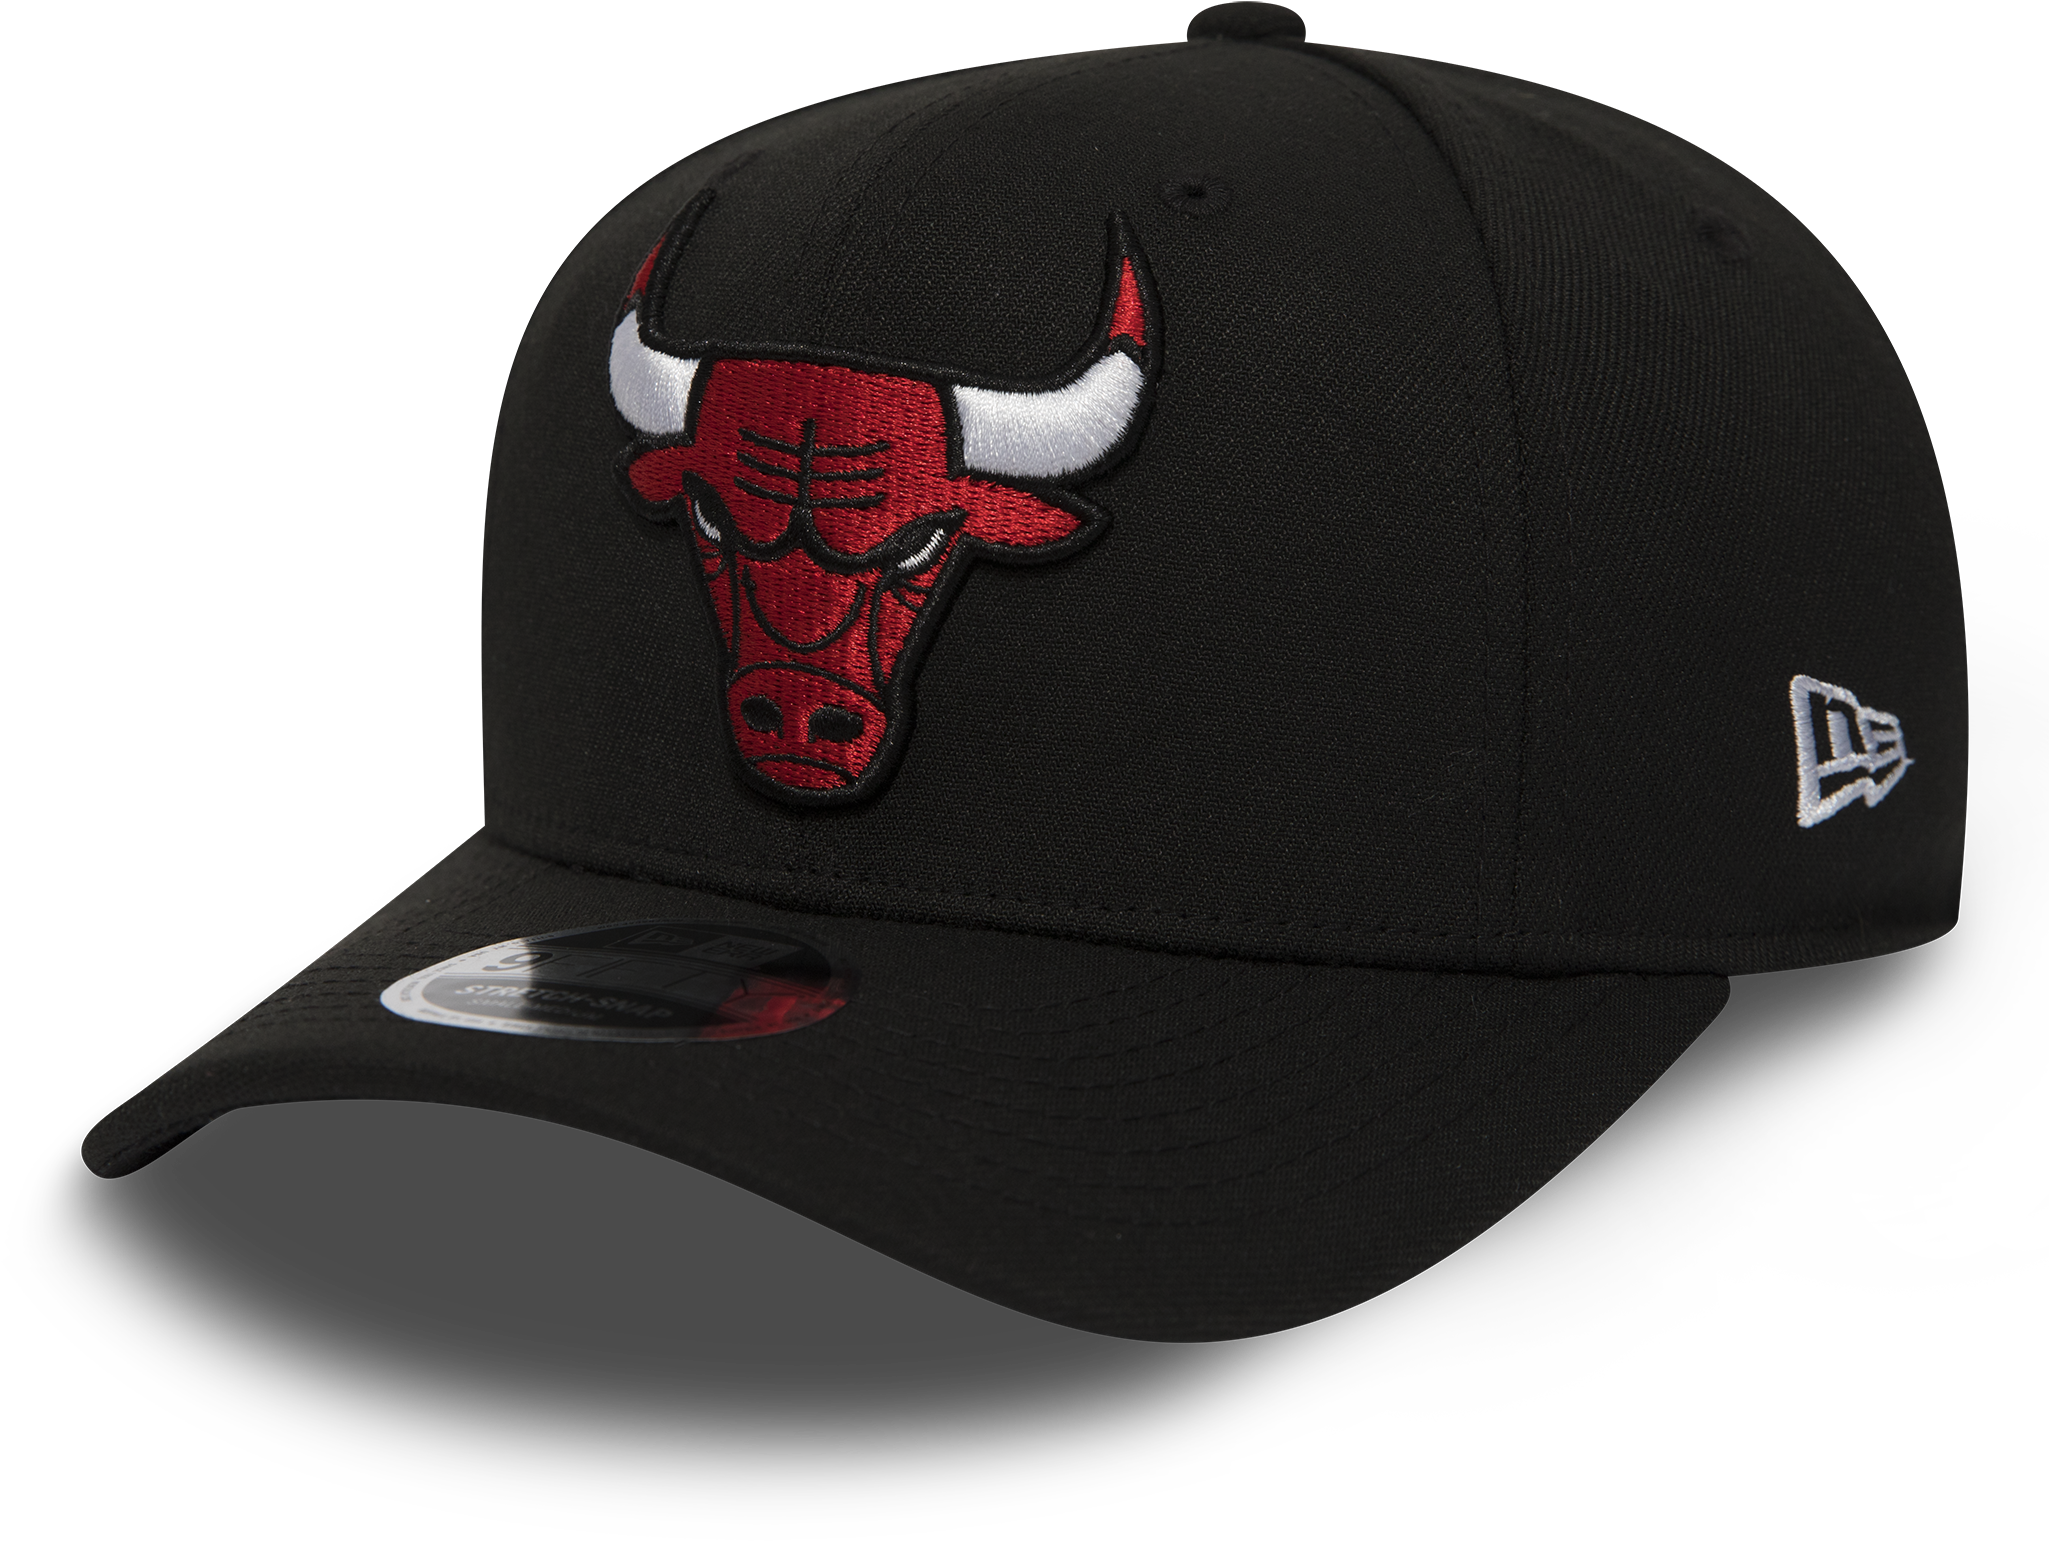 A Black Hat With A Red Bull Head On It